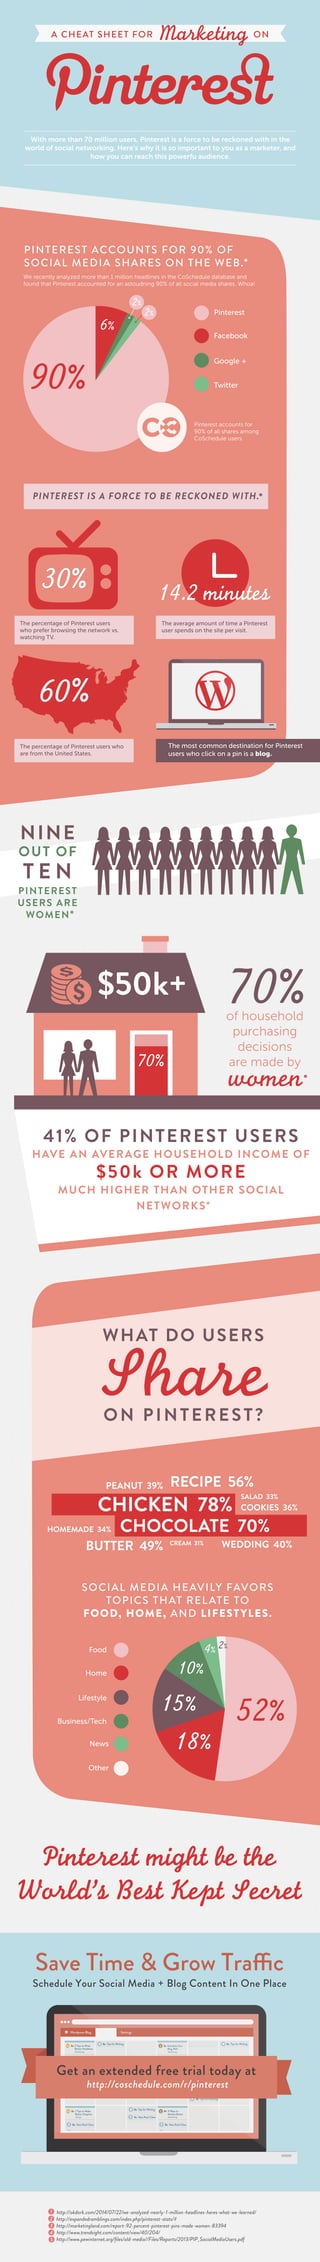 A CHEAT SHEET FOR Marketing ON
PINTEREST ACCOUNTS FOR 90% OF
SOCIAL MEDIA SHARES ON THE WEB.
We recently analyzed more than 1 million headlines in the CoSchedule database and
found that Pinterest accounted for an astoudning 90% of all social media shares. Whoa!
90%
Pinterest
Facebook
Google +
Twitter
Pinterest accounts for
90% of all shares among
CoSchedule users.
PINTEREST IS A FORCE TO BE RECKONED WITH.
NINE
OUT OF
T E N
PINTEREST
USERS ARE
WOMEN
CHICKEN 78%
CHOCOLATE 70%
RECIPE 56%
BUTTER 49% WEDDING 40%
PEANUT 39%
COOKIES 36%
HOMEMADE 34%
SALAD 33%
CREAM 31%
SOCIAL MEDIA HEAVILY FAVORS
TOPICS THAT RELATE TO
FOOD, HOME, AND LIFESTYLES.
52%
Food
Home
Lifestyle
Business/Tech
18%
15%
10%
4% 2%
News
Other
6%
2%
2%
1. http://okdork.com/2014/07/22/we-analyzed-nearly-1-million-headlines-heres-what-we-learned/
2. http://expandedramblings.com/index.php/pinterest-stats/#
3. http://marketingland.com/report-92-percent-pinterest-pins-made-women-83394
4. http://www.trendsight.com/content/view/40/204/
5. http://www.pewinternet.org/ﬁles/old-media//Files/Reports/2013/PIP_SocialMediaUsers.pdf
Wordpress Blog Settings
8a Tips for Writing
8a 5 Tips to Write
Better Headlines
Marketing
9a Tips for Writing
8a New Post! Chec
9a New Post! Chec
8a Grow Your
Audience
Marketing
8a Schedule Your
Blog Well
Marketing
9a Planning Your
New Calendar
Marketing
9a Tips for Planning
8a New Post! Chec
8a Tips for Writing
8a 7 Tips to Make
Better Graphics
Design
9a Tips for Writing
8a New Post! Chec
8a 3 Ways to
Market Better
Marketing
9a Tips for Writing
8a New Post! Chec
8a Tips for Writing
9a New Post! Chec
Schedule Your Social Media + Blog Content In One Place
Save Time & Grow Traffic
Get an extended free trial today at
http://coschedule.com/r/pinterest
With more than 70 million users, Pinterest is a force to be reckoned with in the
world of social networking. Here’s why it is so important to you as a marketer, and
how you can reach this powerfu audience.
30%
60%
The percentage of Pinterest users
who prefer browsing the network vs.
watching TV.
The average amount of time a Pinterest
user spends on the site per visit.
The percentage of Pinterest users who
are from the United States.
The most common destination for Pinterest
users who click on a pin is a blog.
14.2 minutes
 